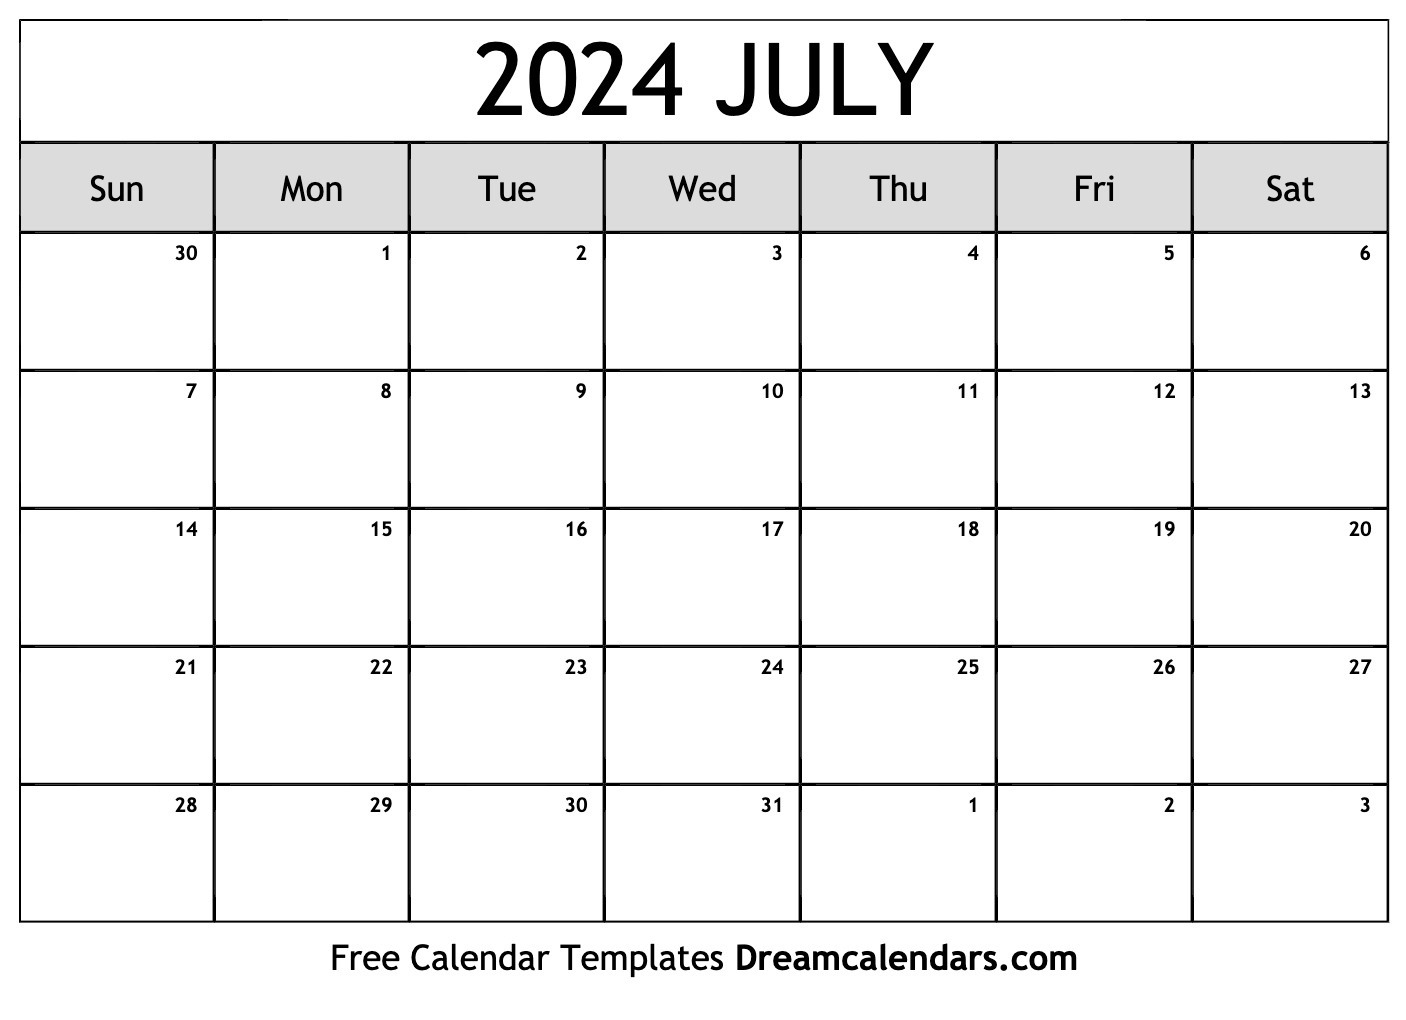 July 2024 Calendar - Free Printable With Holidays And Observances throughout Calendar Pages July 2024